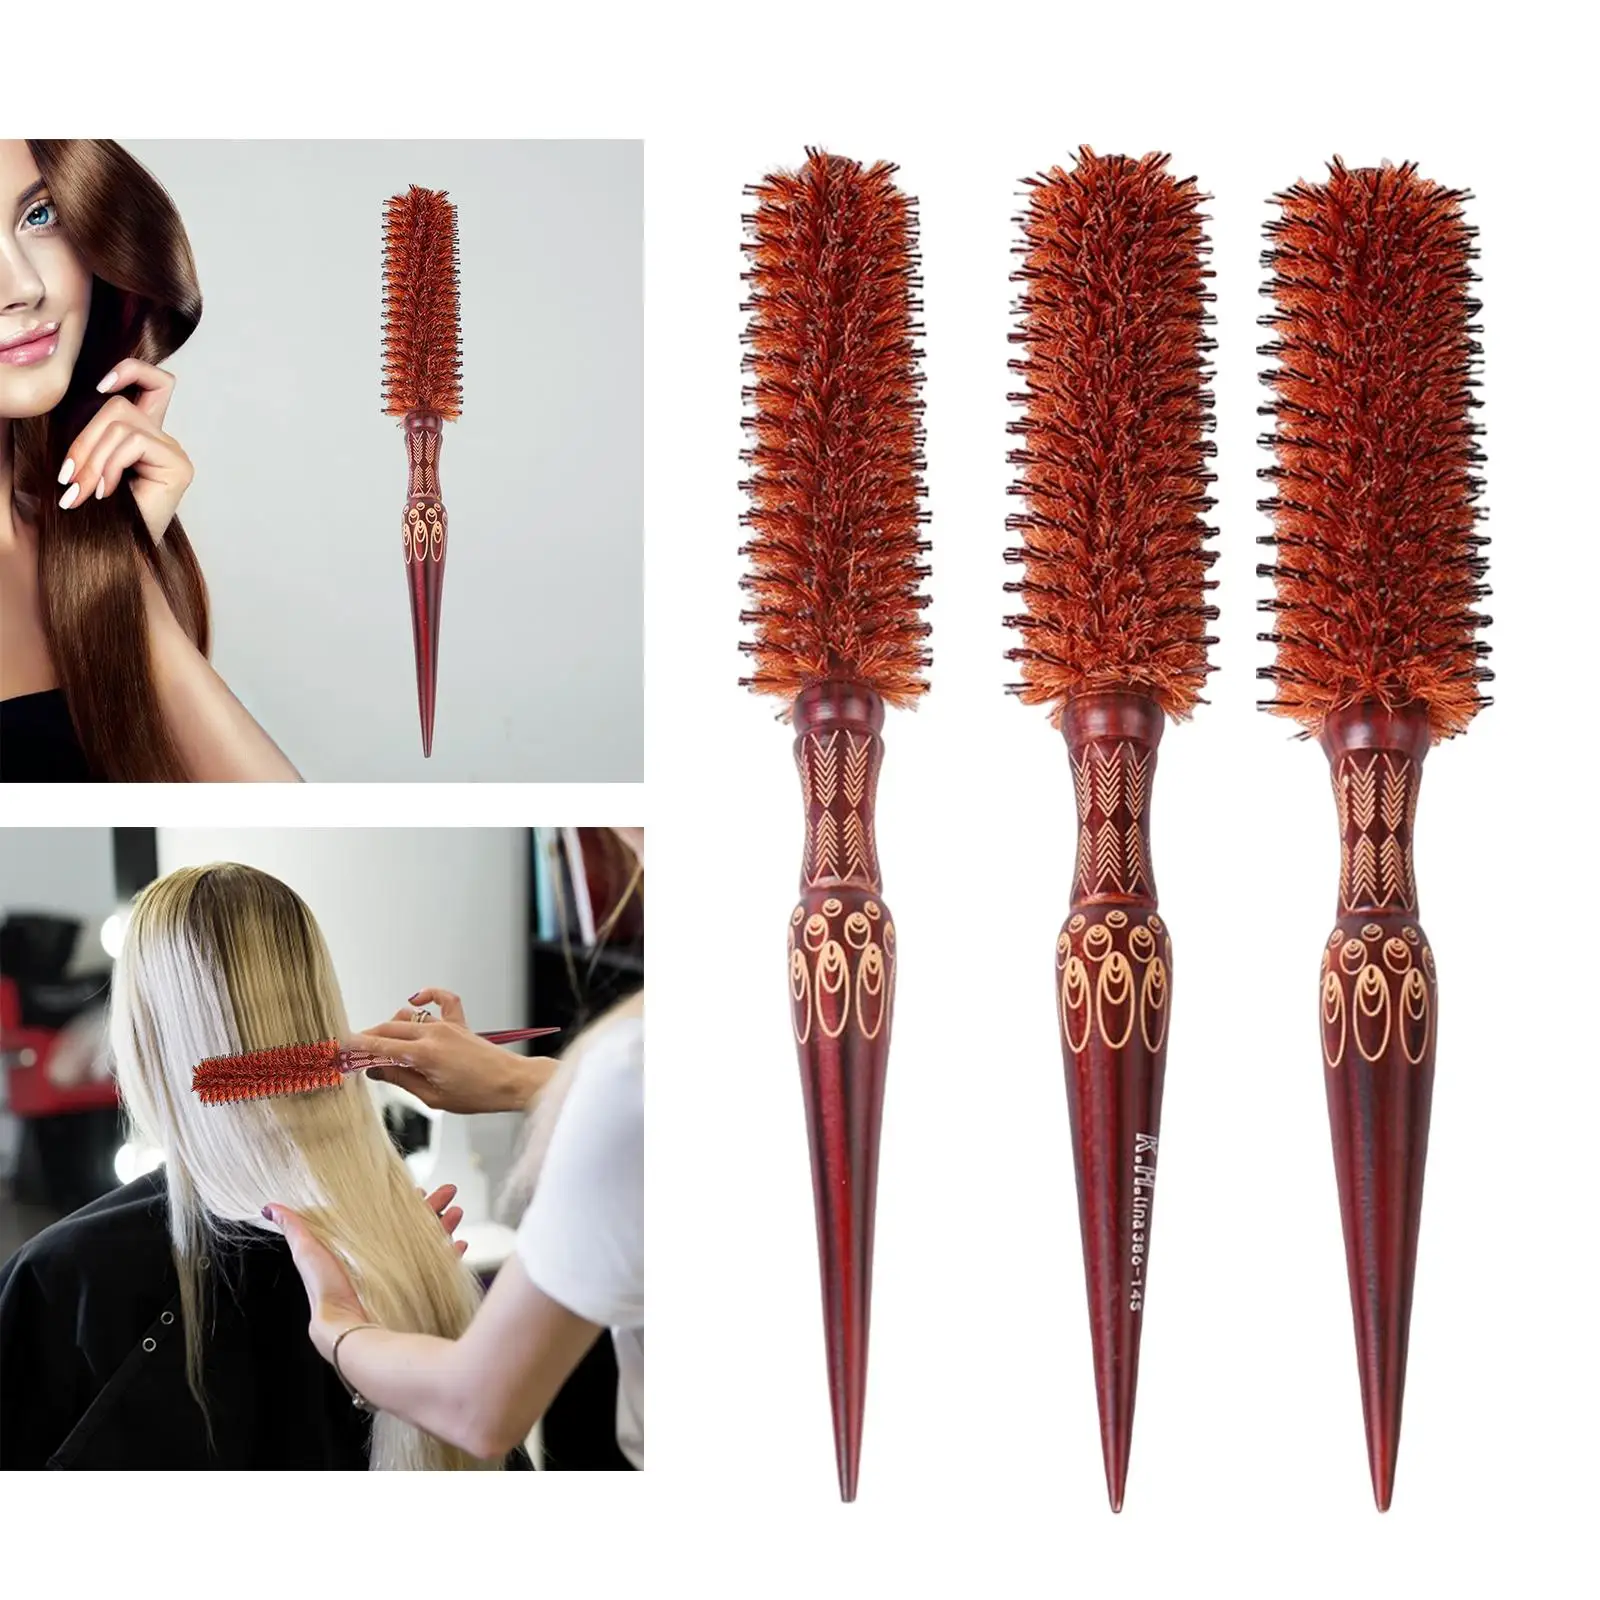 Round Hair Brush Light Weight High Temperature Resistant Wood Handle Hairbrush for Heat Styling Blow Drying Barber Salon